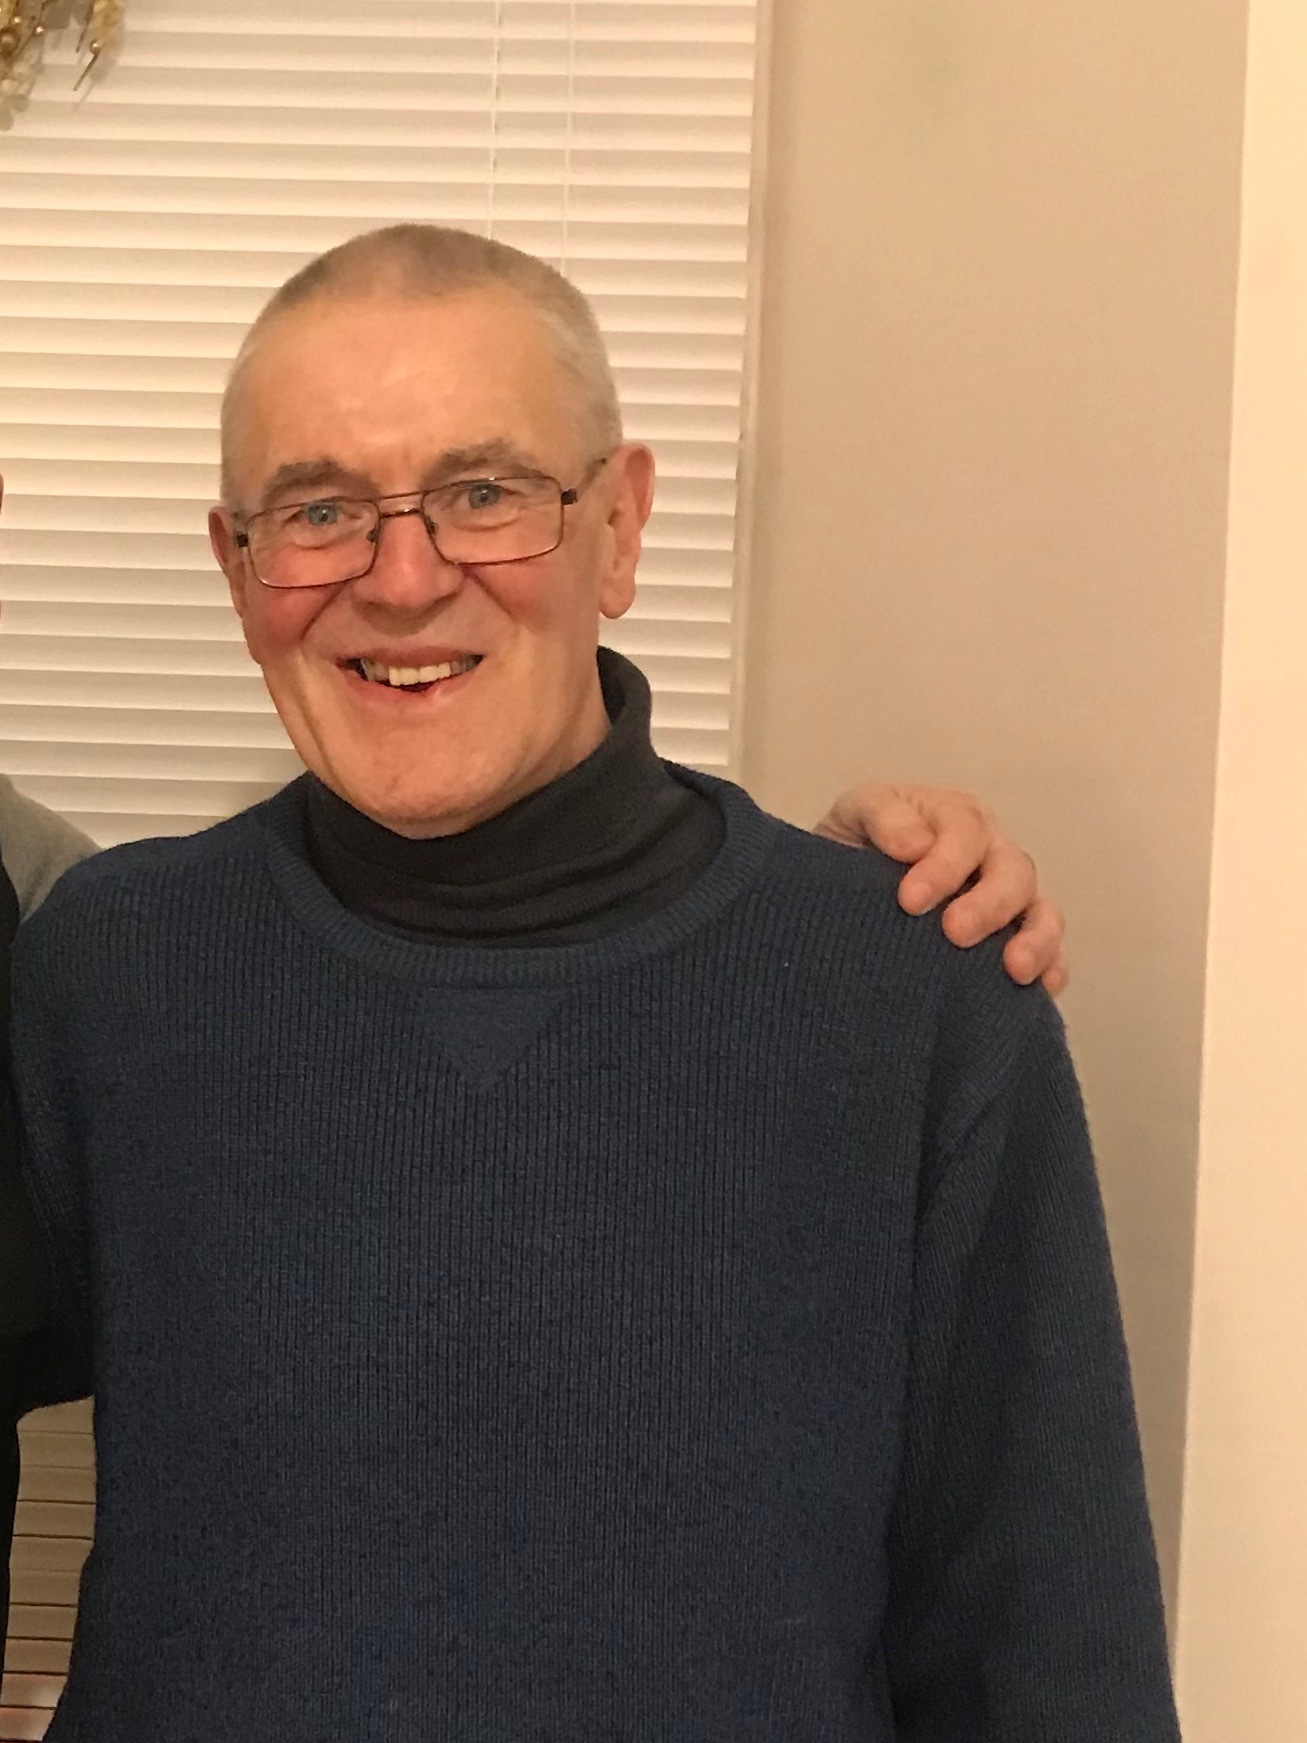 Patrick McLean, 65, turned to MacMillan after his terminal cancer diagnosis